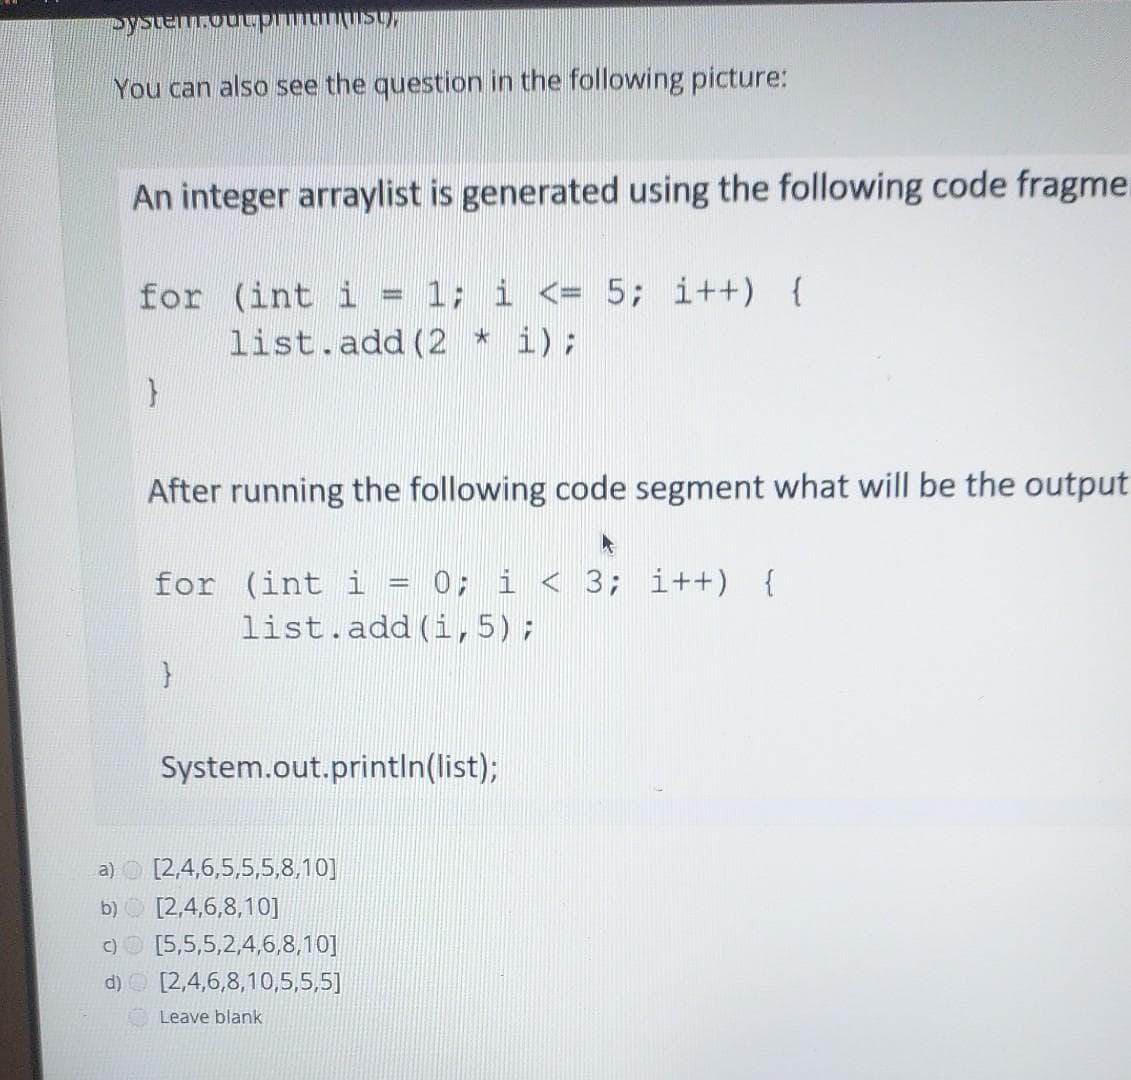 Mhsulunuud nnowaisk
You can also see the question in the following picture:
An integer arraylist is generated using the following code fragme
for (int i = 1; i <= 5; i++) {
i);
list.add (2
After running the following code segment what will be the output
for (int i = 0; i < 3; i++) {
list.add (i, 5);
System.out.printIn(list);
a) O [2,4,6,5,5,5,8,10]
b) O [2,4,6,8,10]
C)O [5,5,5,2,4,6,8,10]
d) O [2,4,6,8,10,5,5,5]
Leave blank
